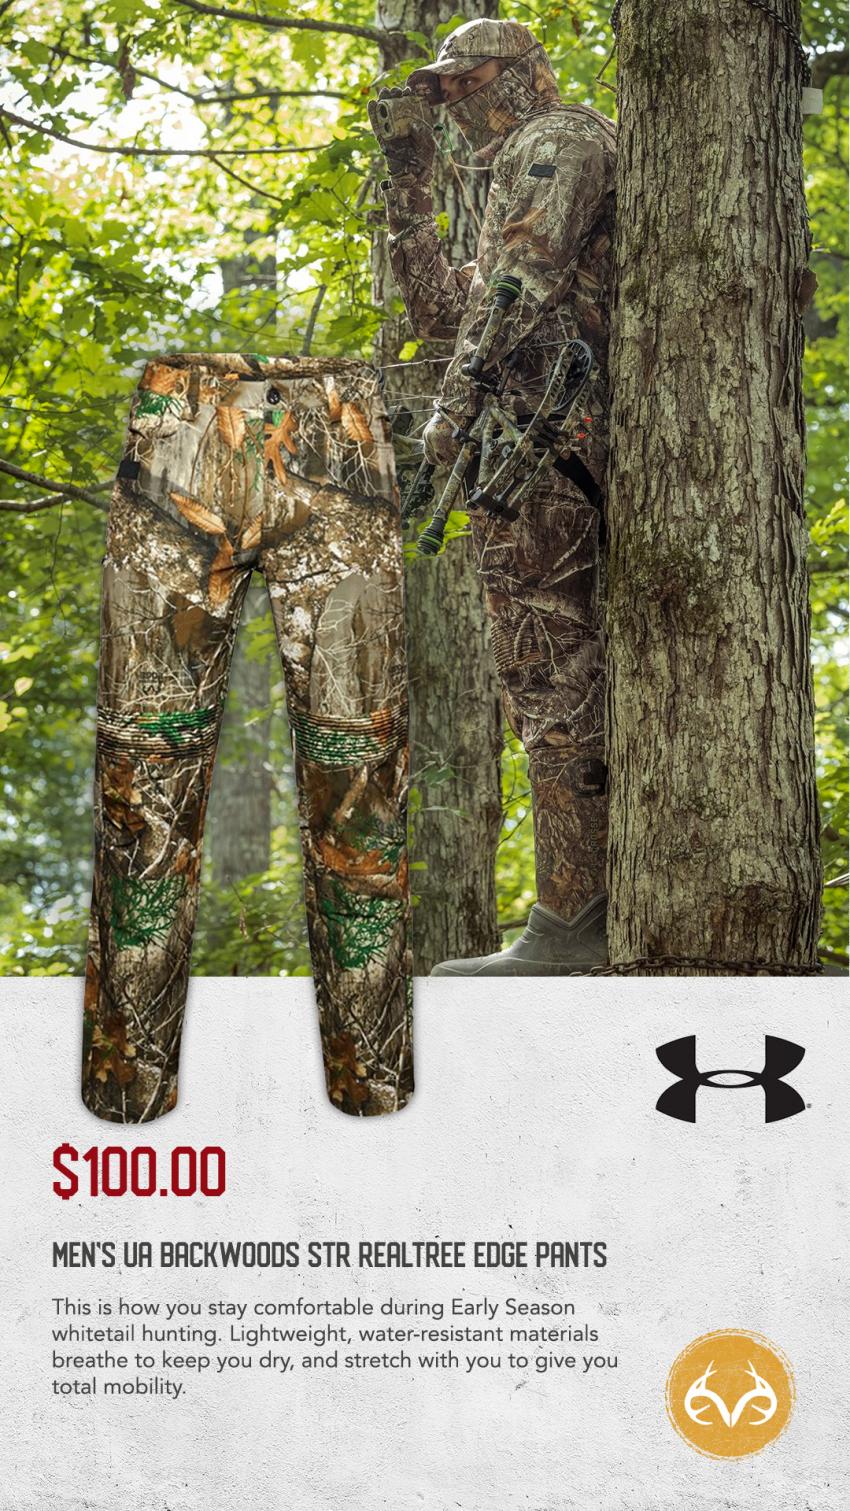 Under Armour Realtree Camo Apparel Gives Hunters the Edge Afield With  Impressive Technologies